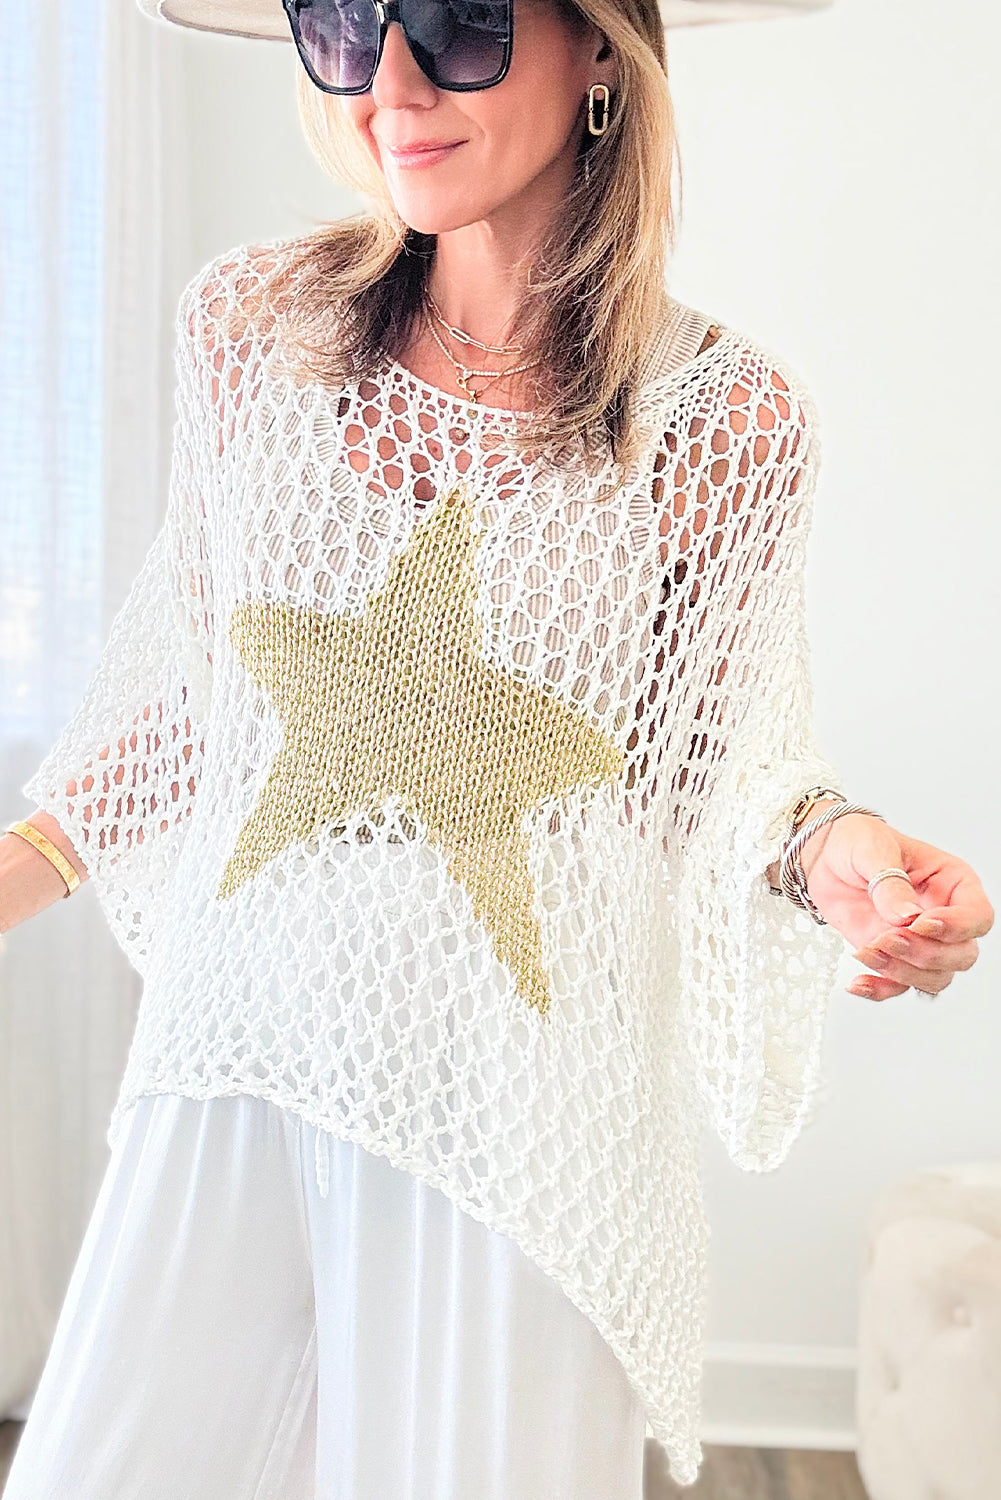 Blue Zone Planet |  White Star Graphic Crochet Knitted Summer Sweater Top Blue Zone Planet